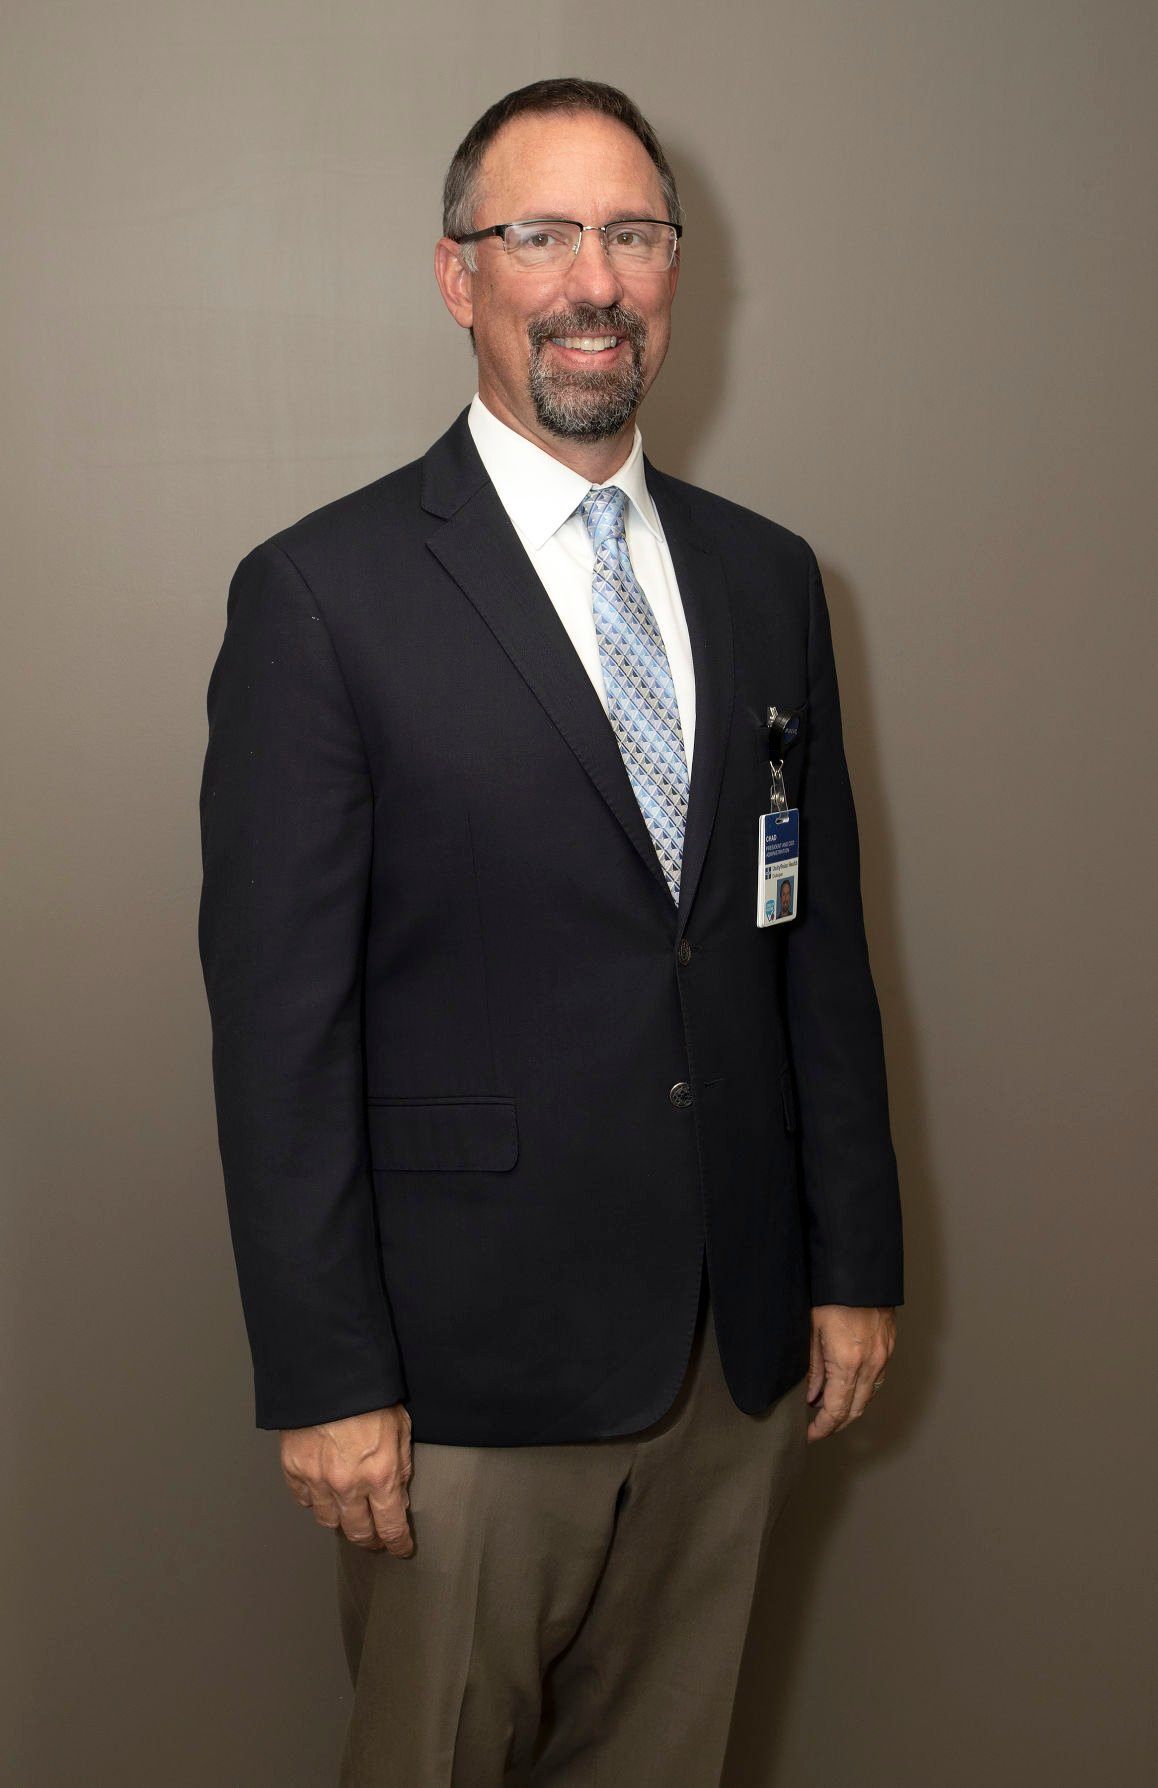 Chad Wolbers, UnityPoint Health — Finley Hospital president and CEO.    PHOTO CREDIT: Stephen Gassman